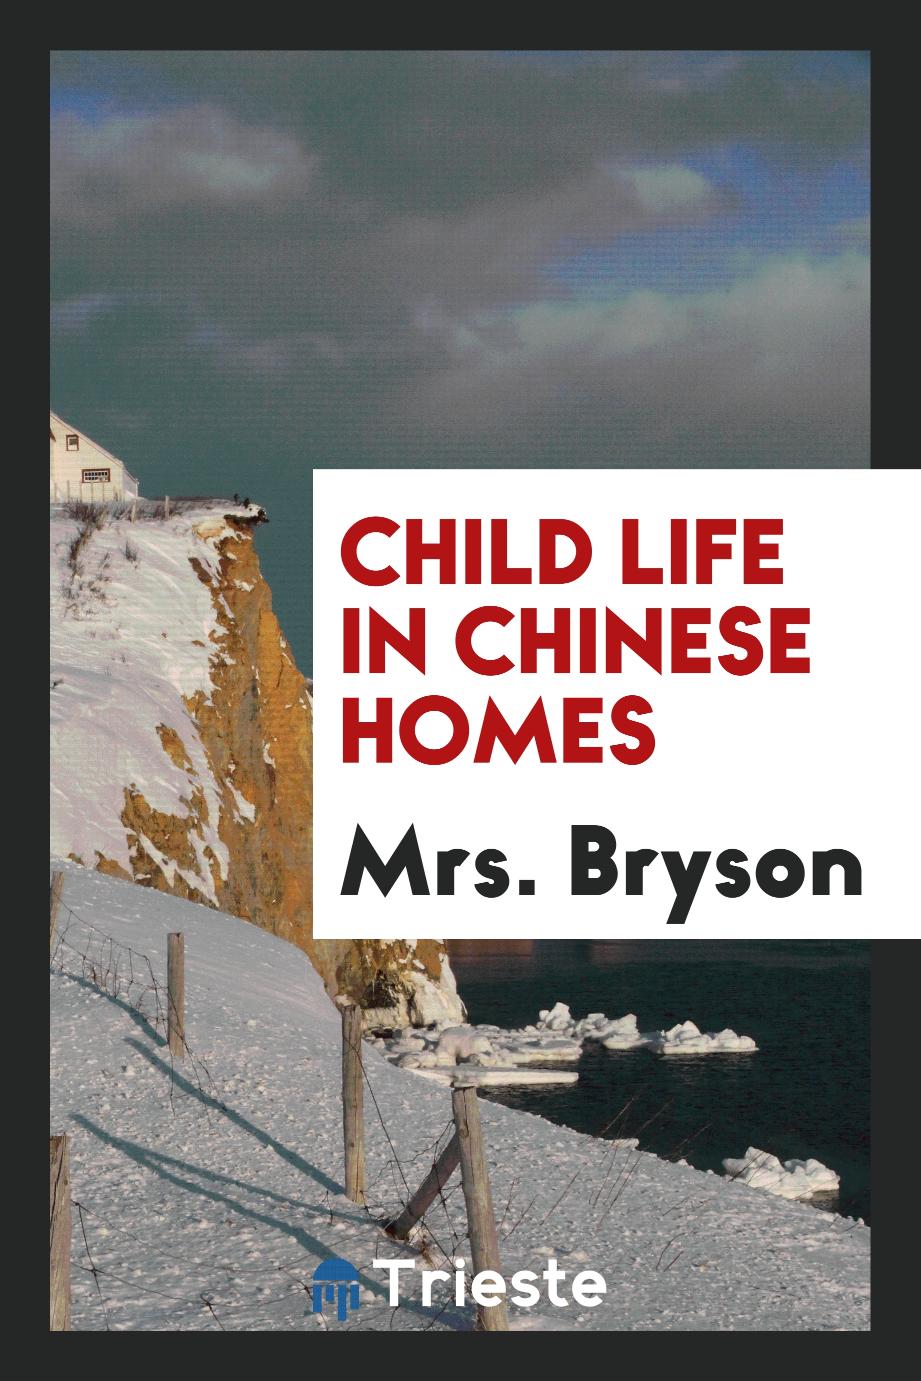 Child life in Chinese homes